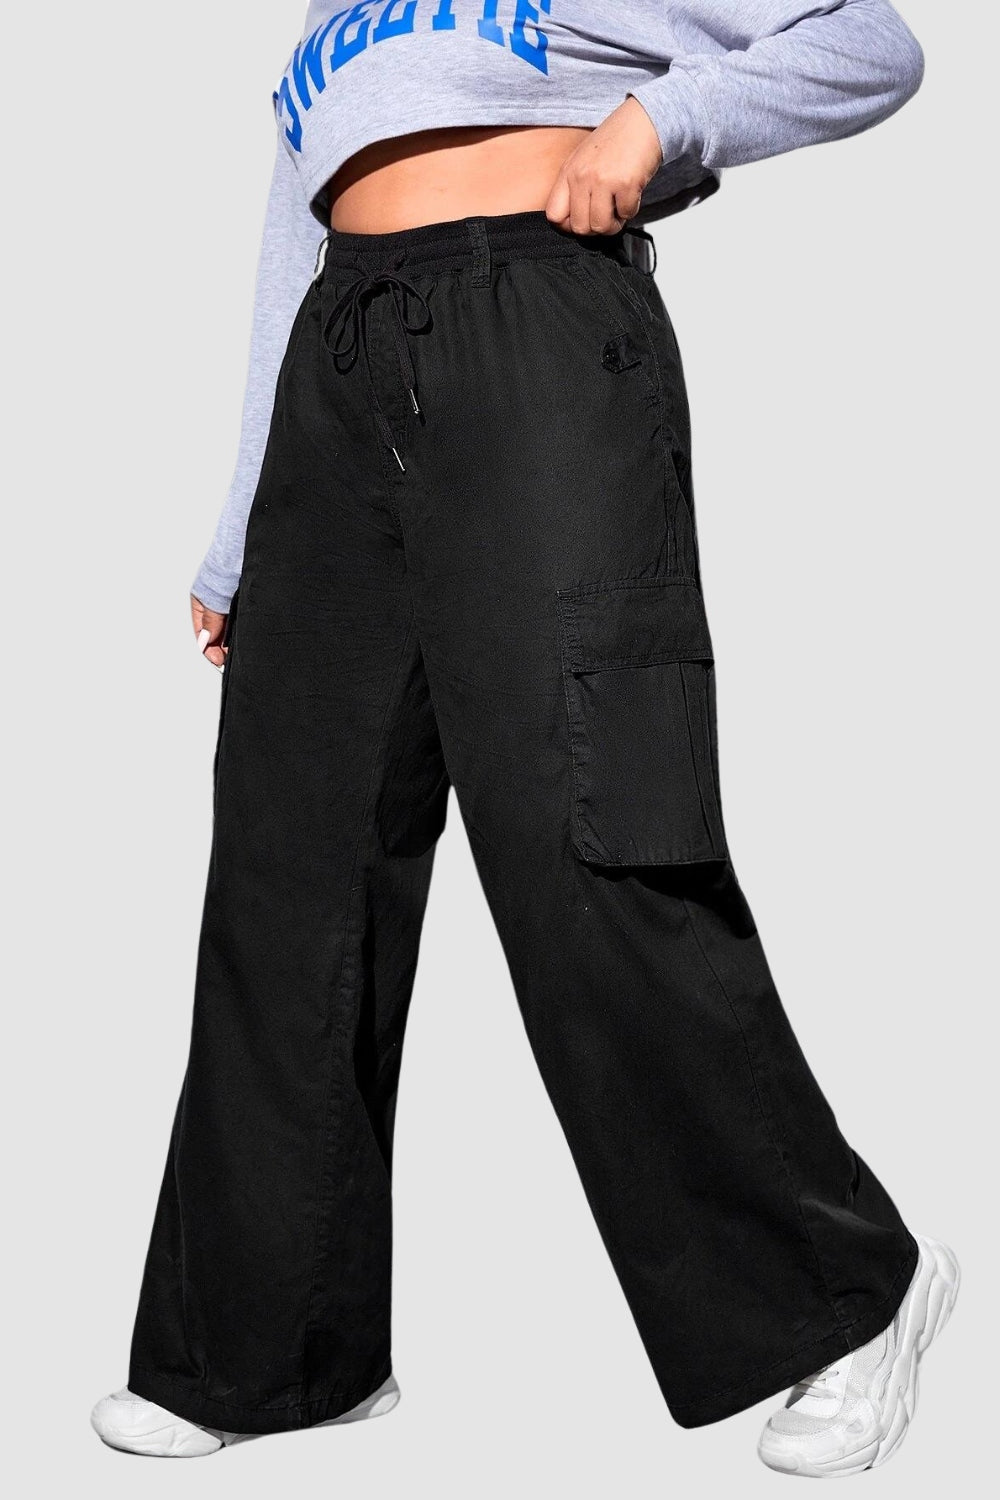 Black Loose Cargo Trousers